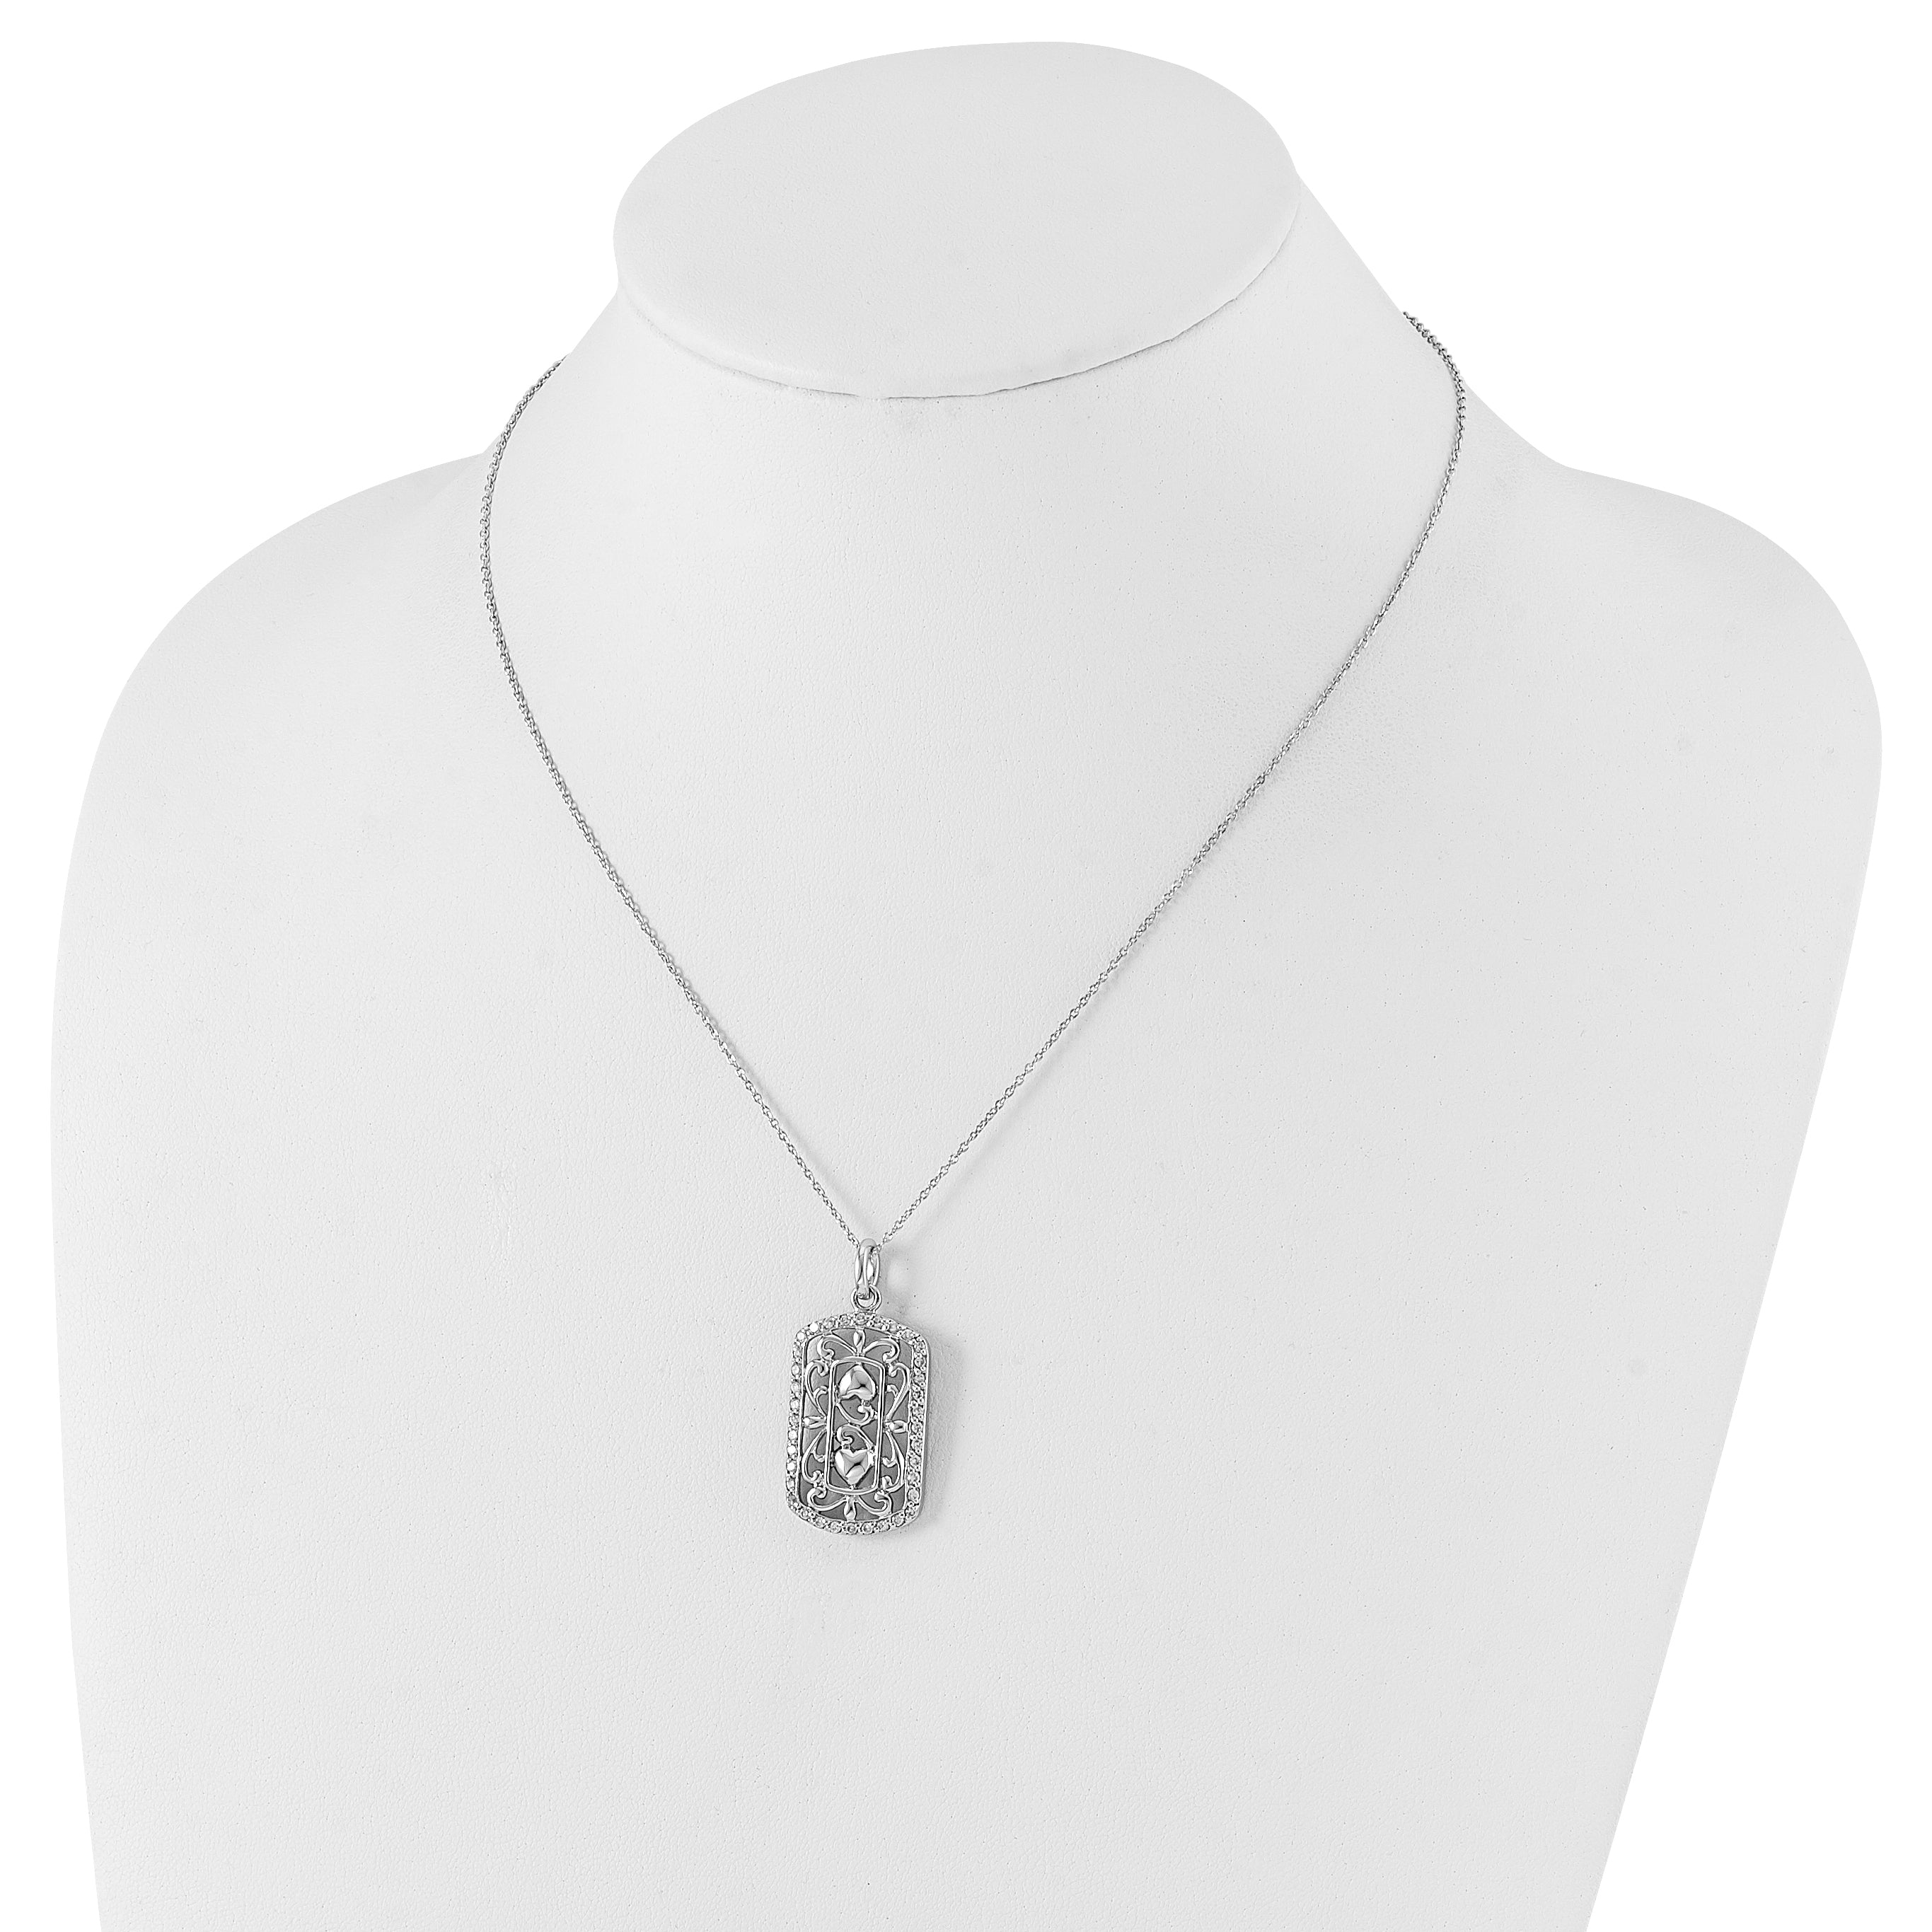 Sentimental Expressions Sterling Silver Polished CZ Thankful for You Necklace